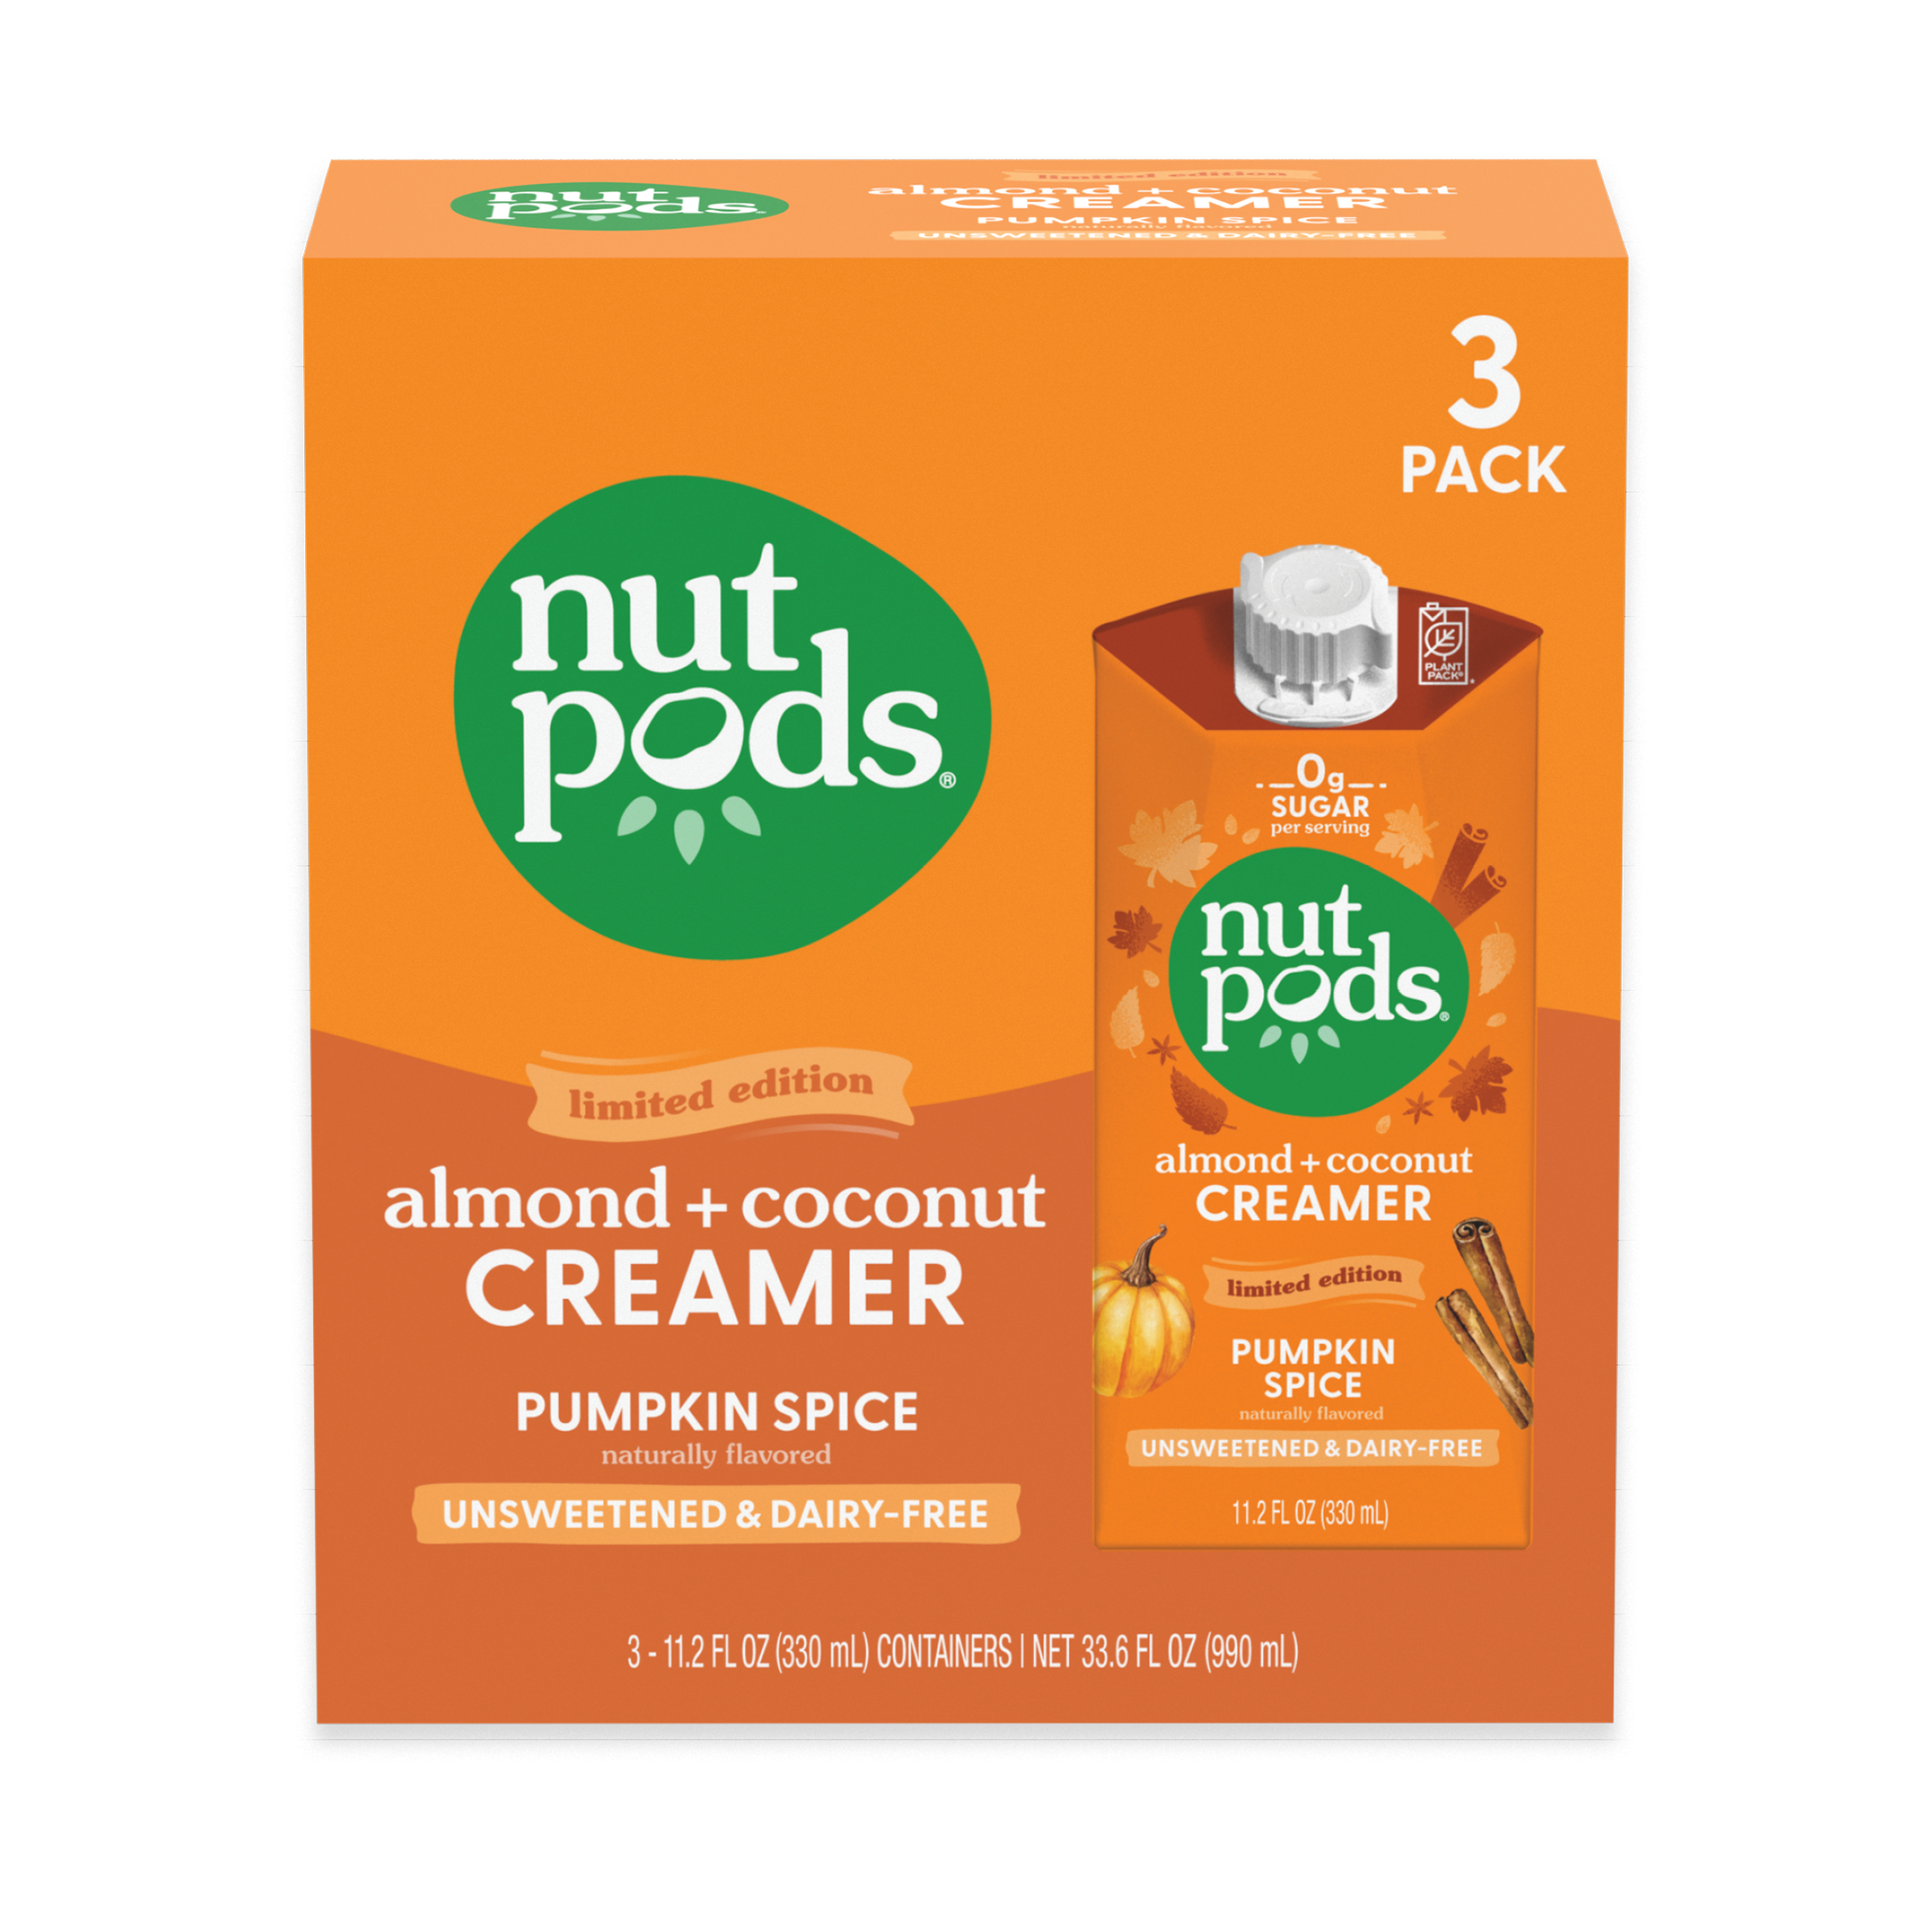 Unsweetened Almond and Coconut Pumpkin Spice Creamer 3 Pack